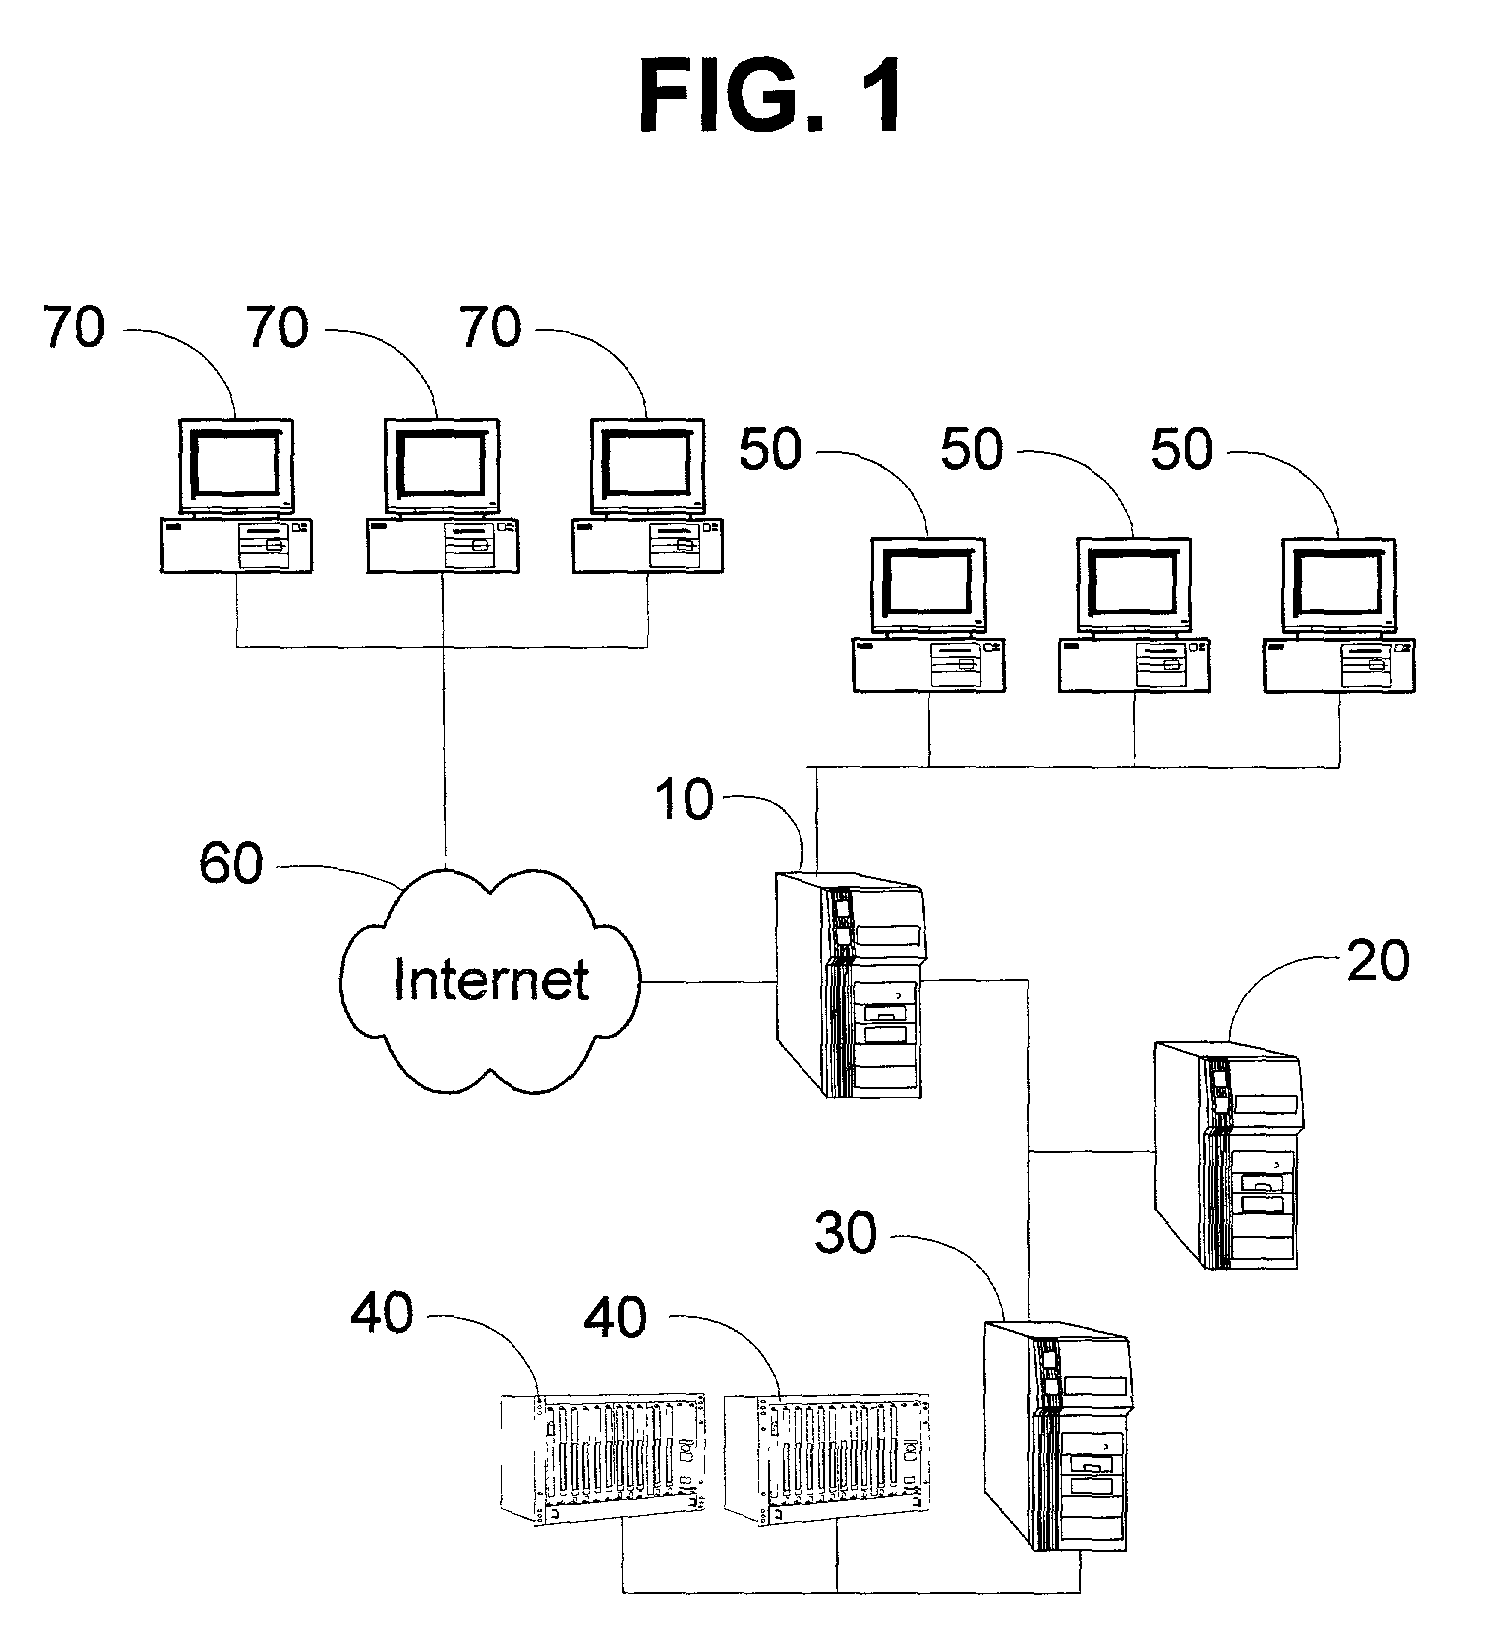 Method and system for animating graphical user interface elements via a manufacturing/process control portal server